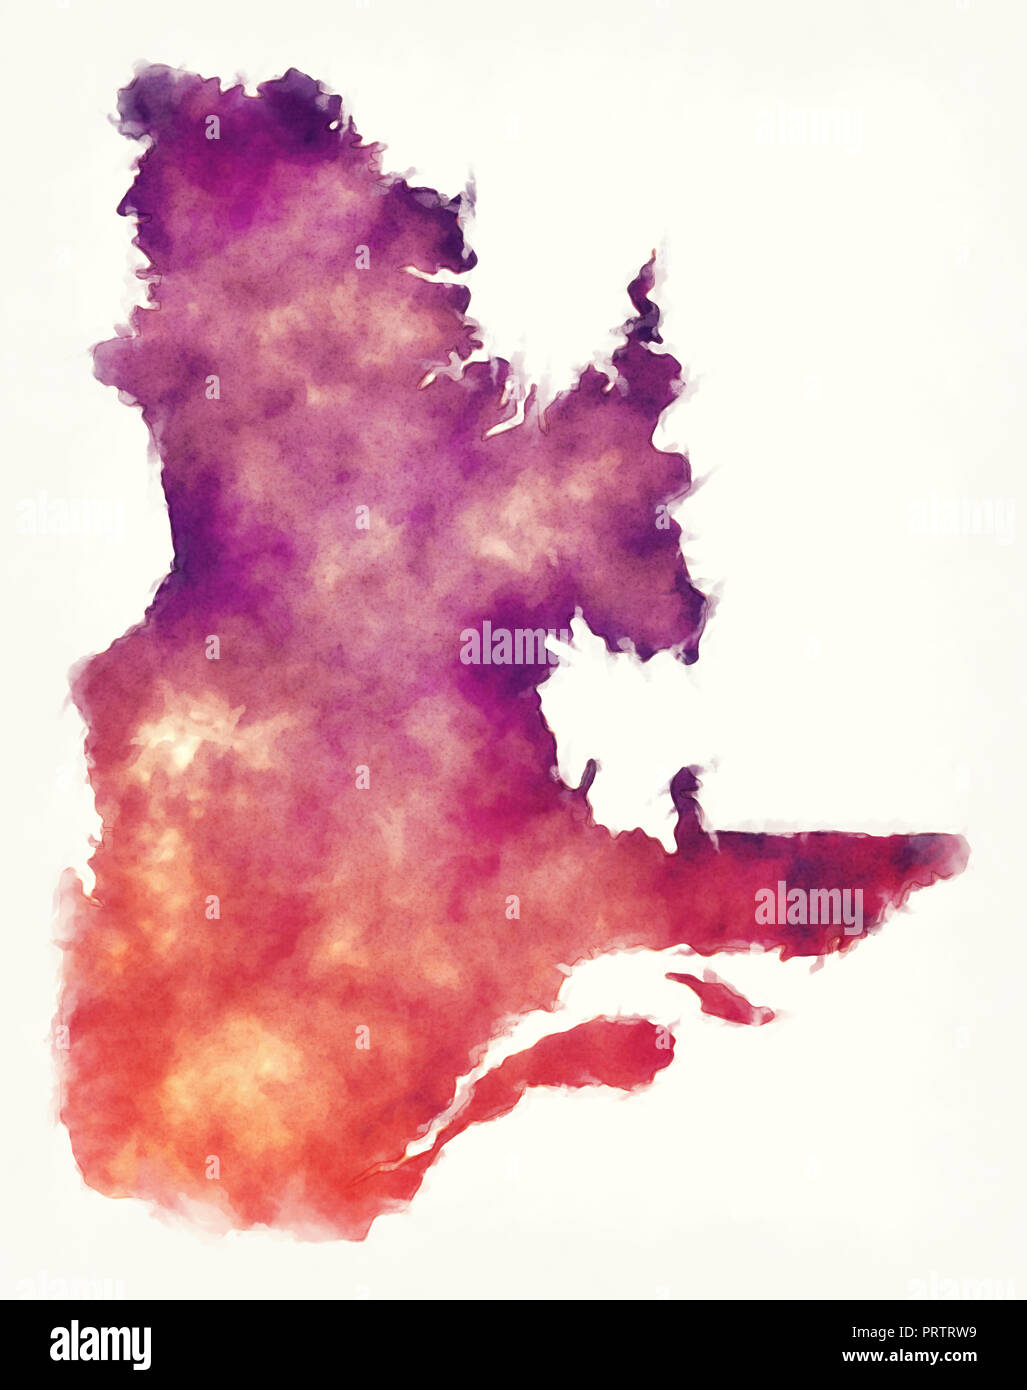 Quebec Province watercolor map of Canada in front of a white background Stock Photo